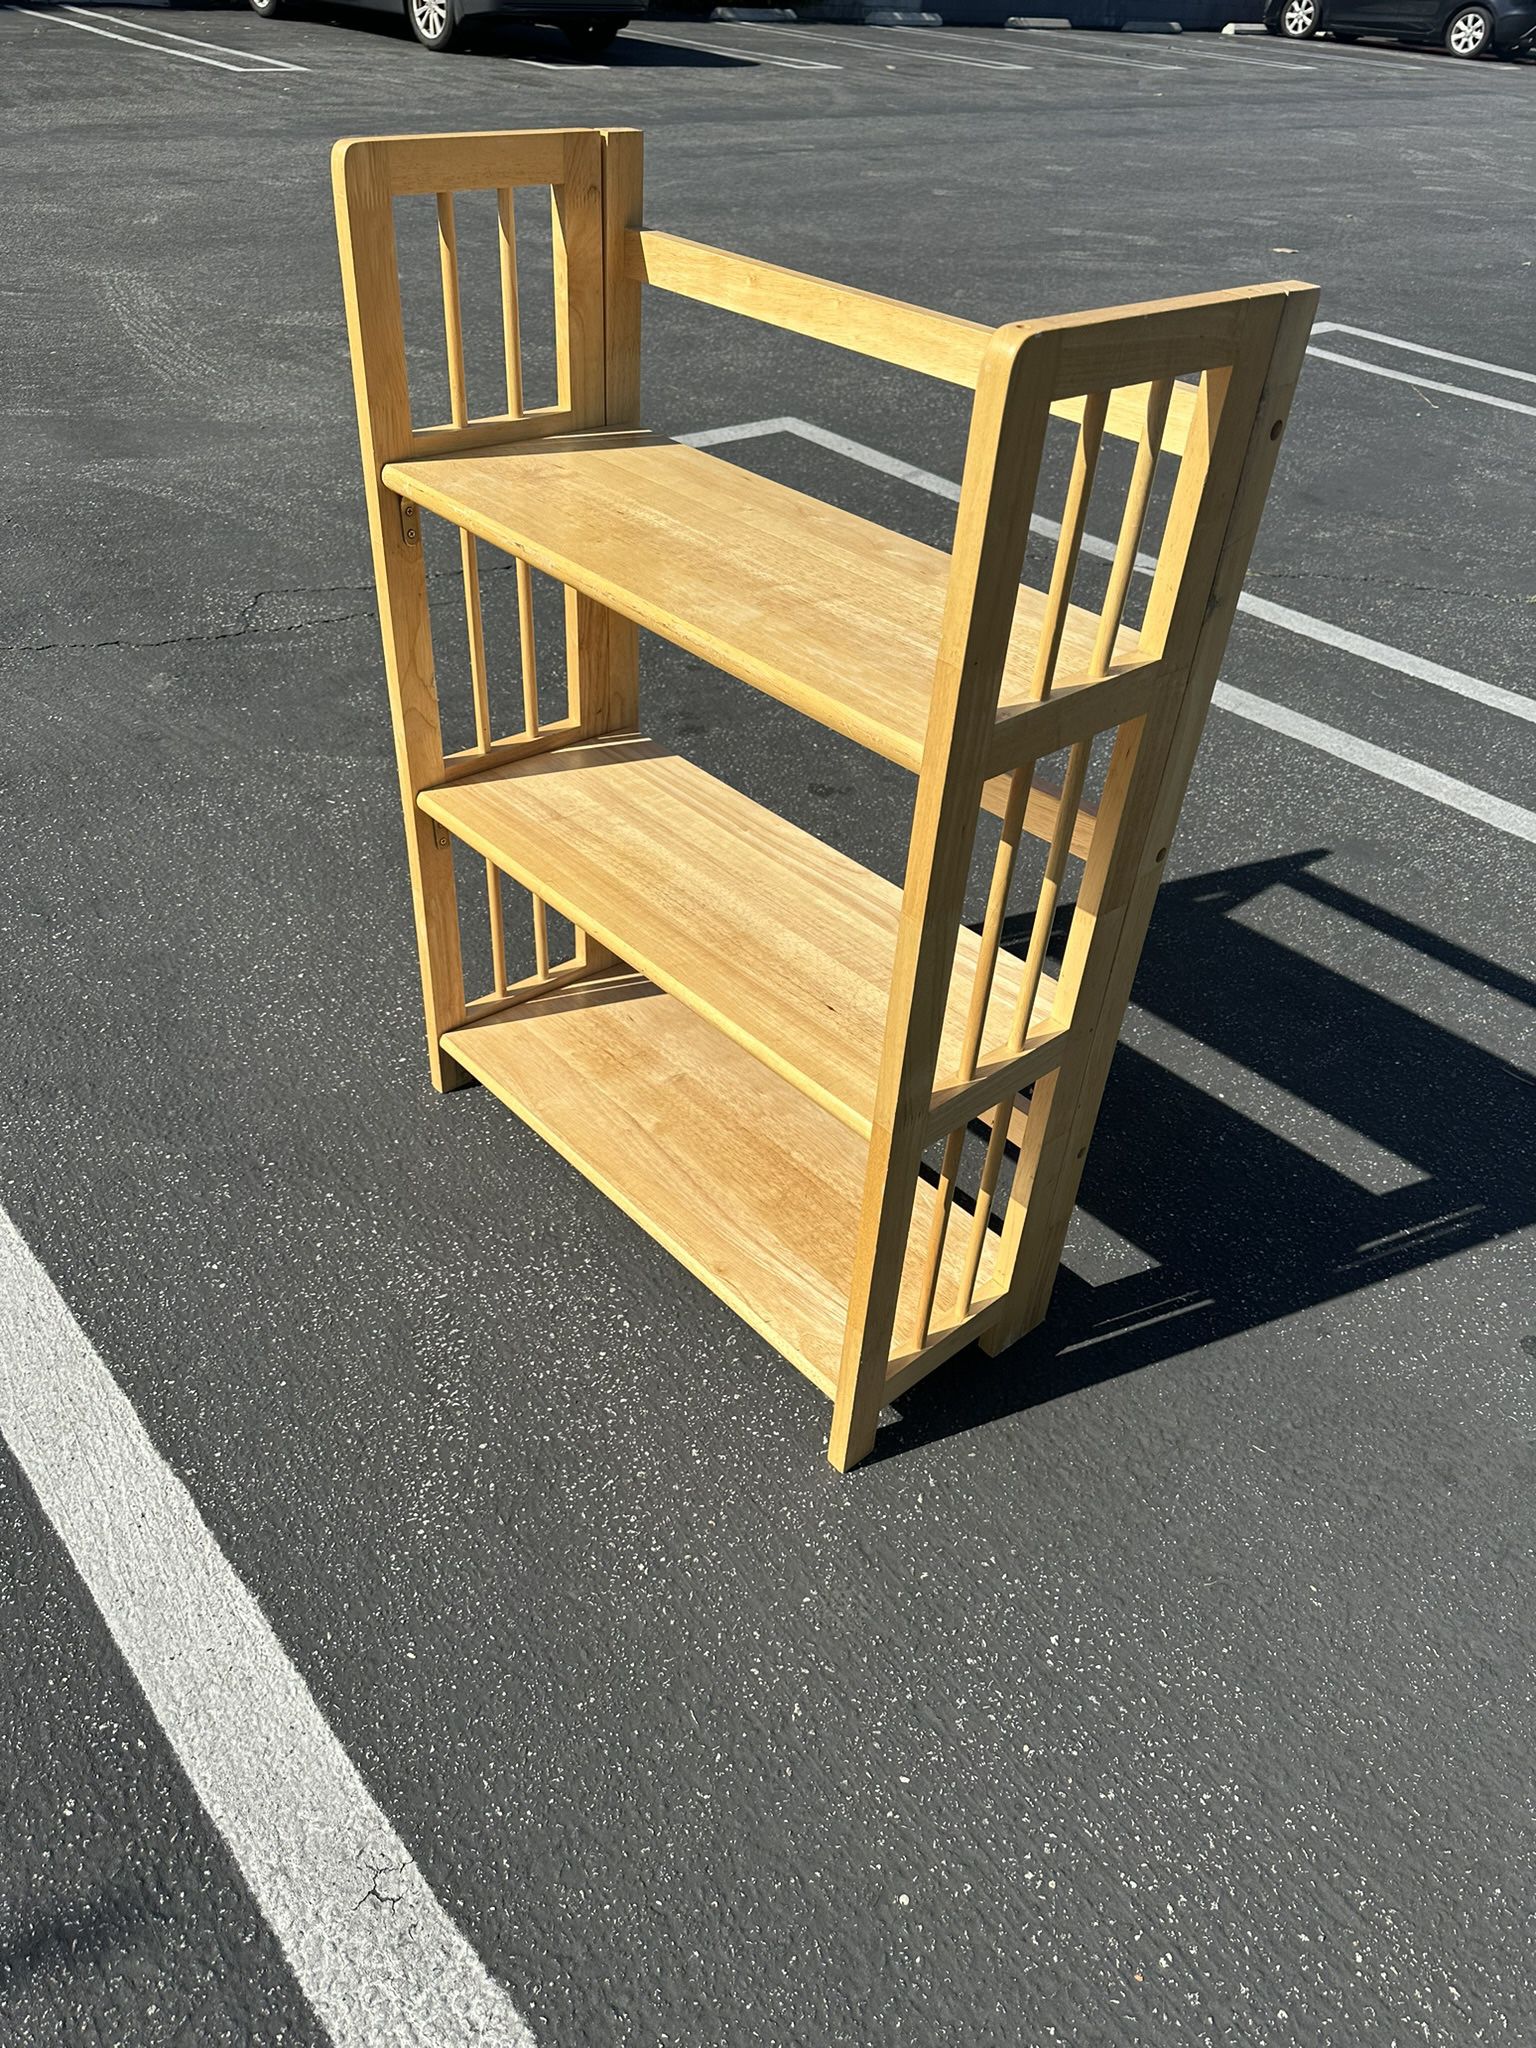 Collapsible Folding Book Shelve 87.00 Pick Up in Glendale 